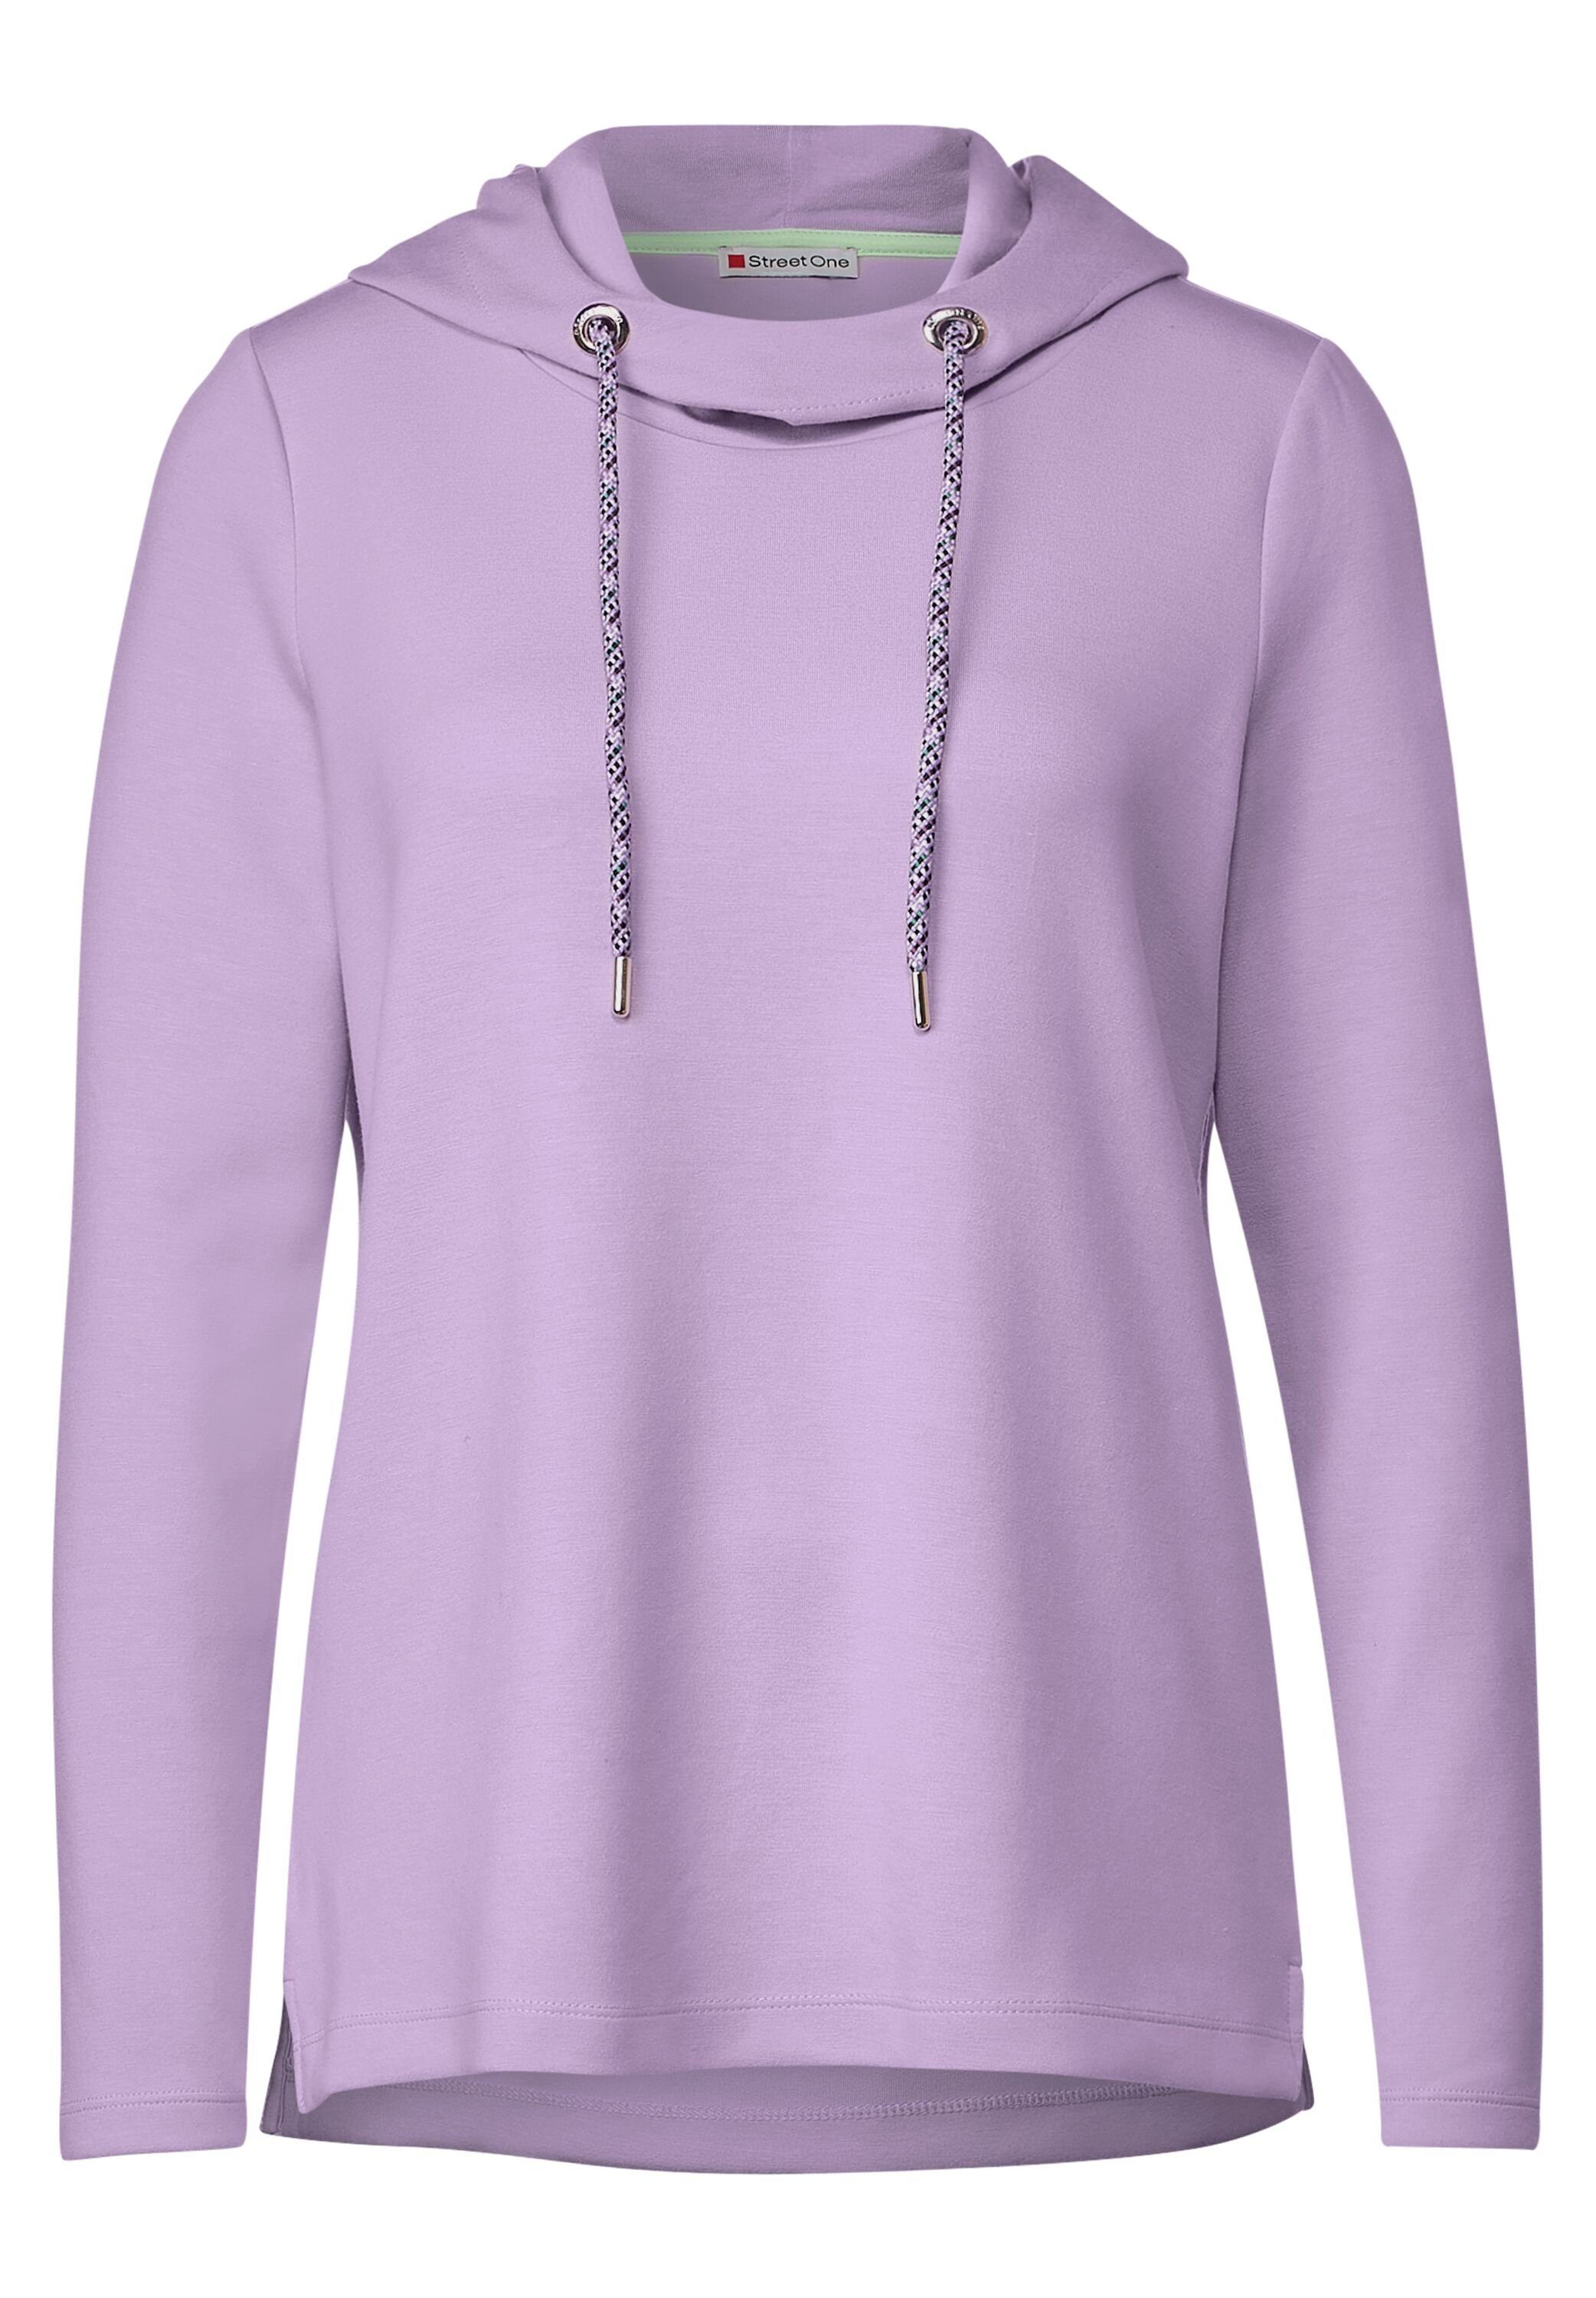 STREET ONE Strickpullover soft pure lilac